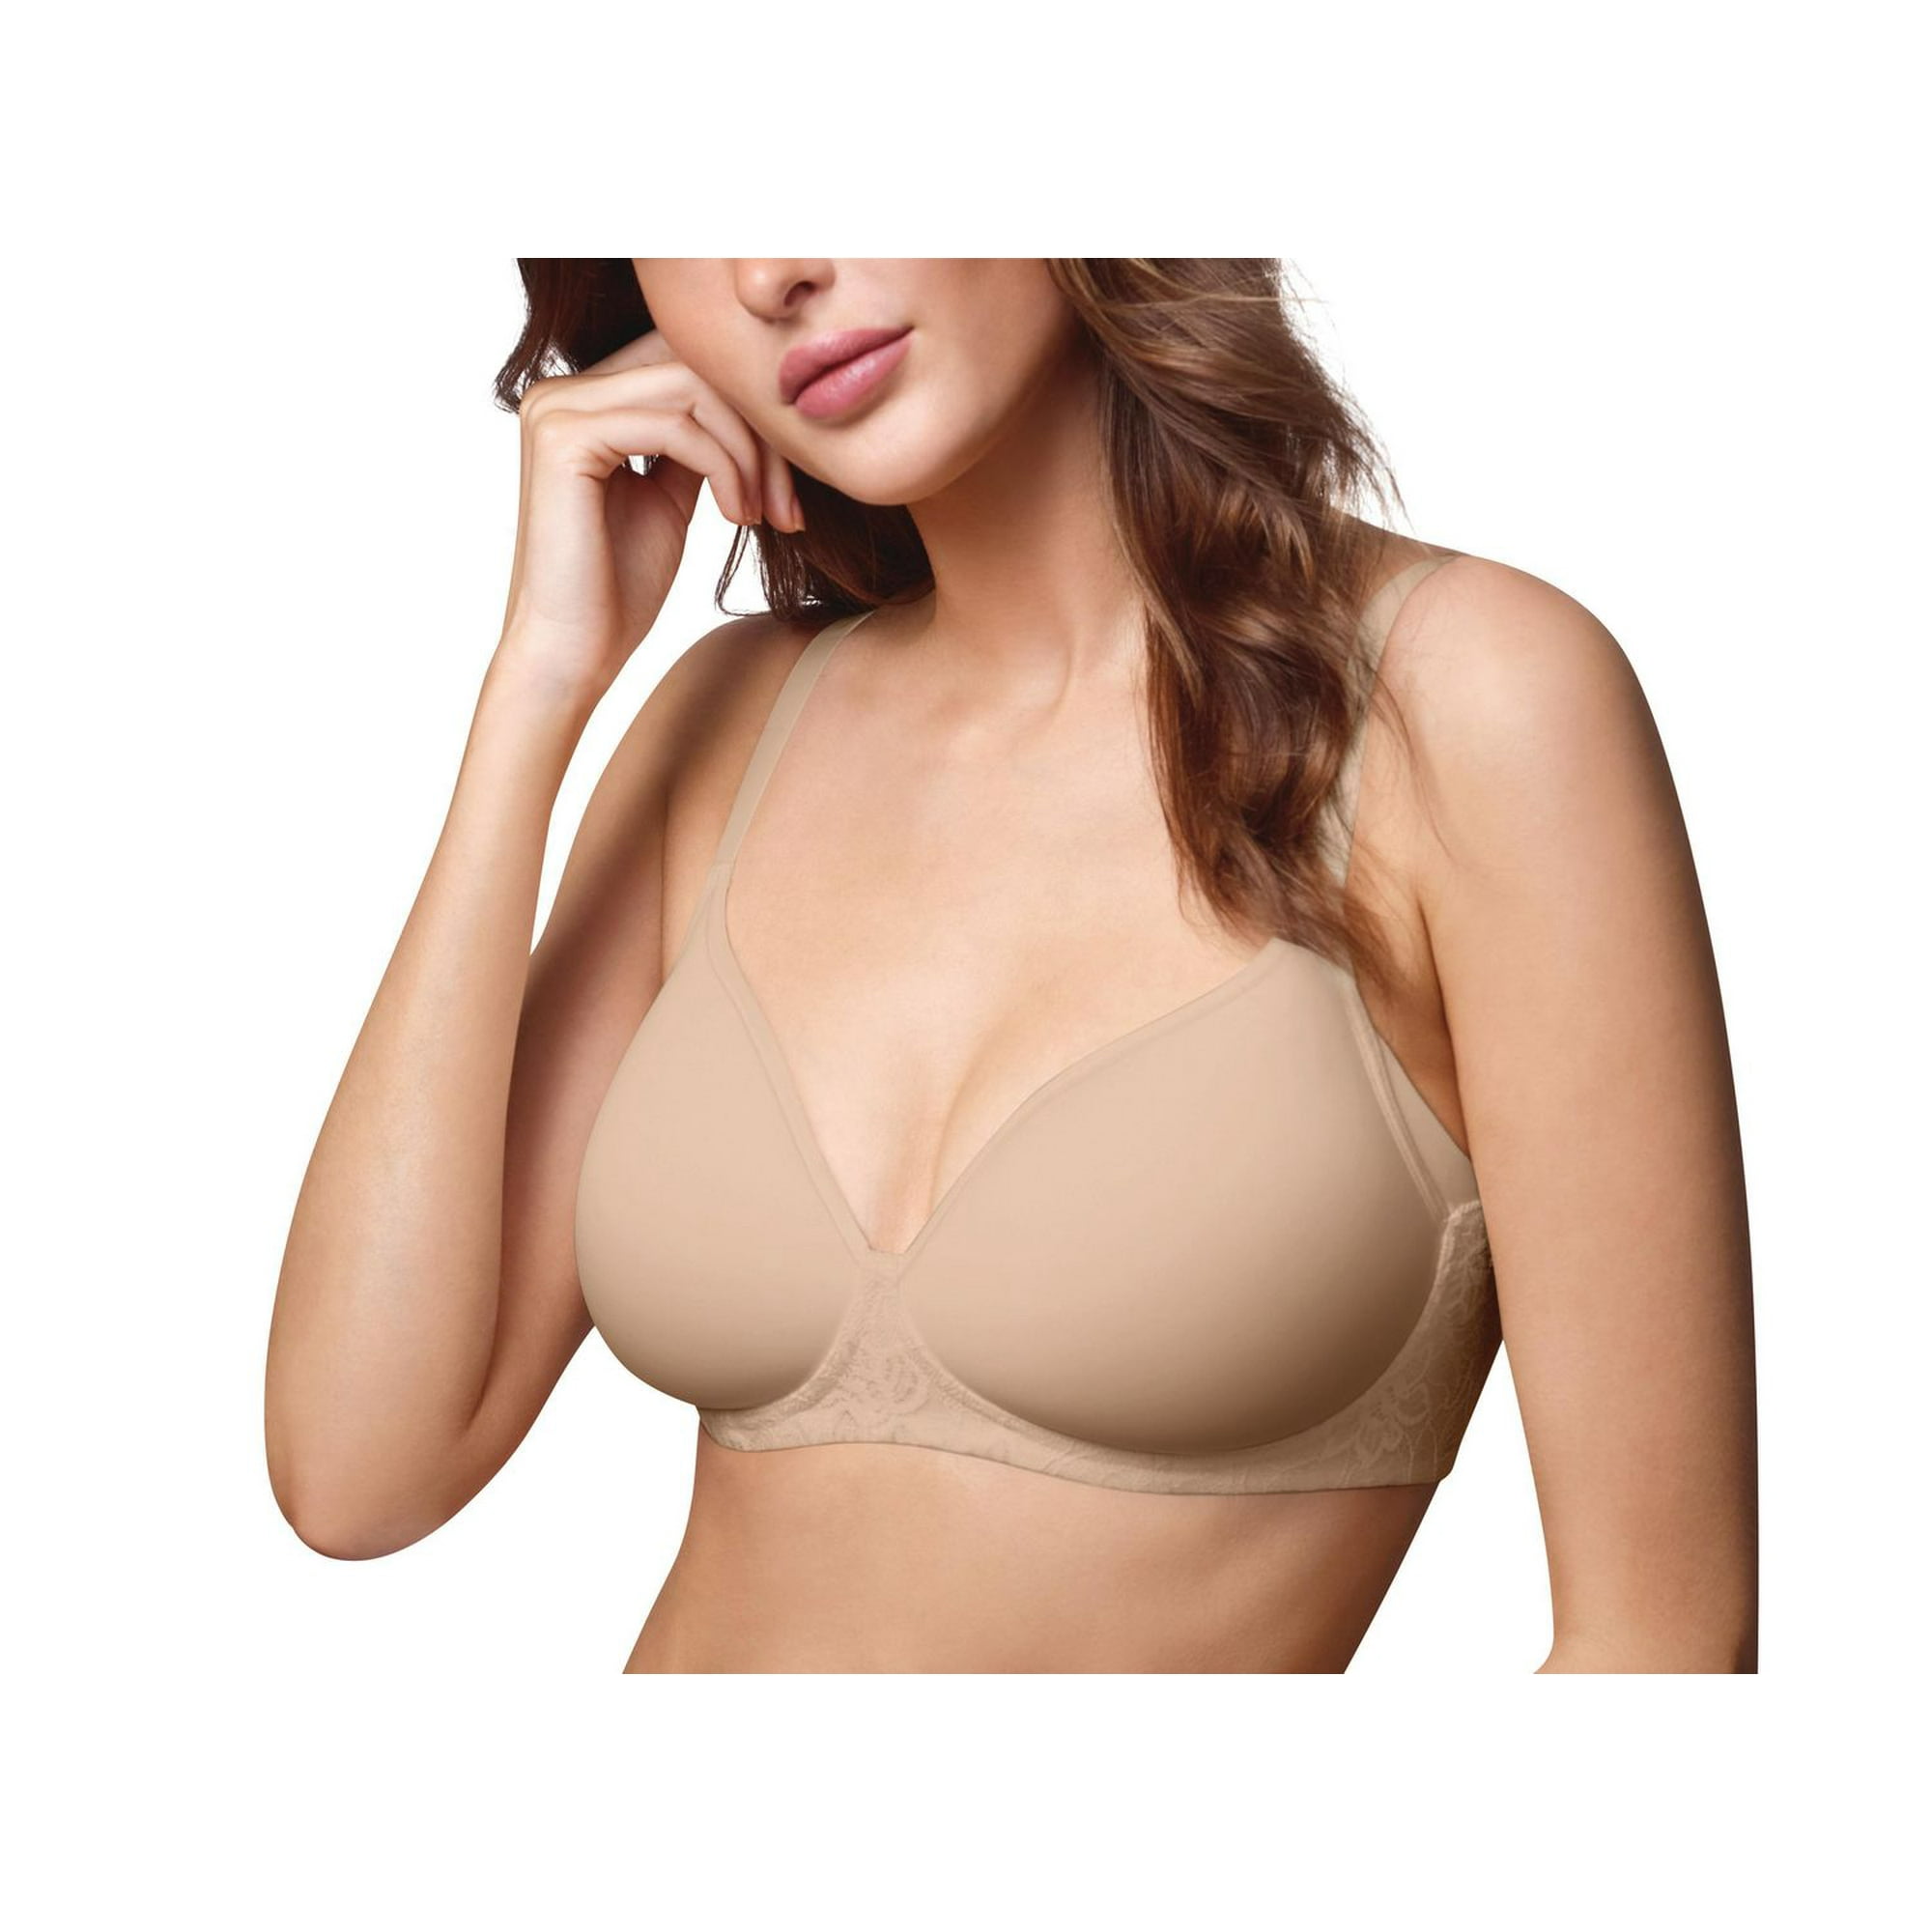 Wonderbra products » Compare prices and see offers now